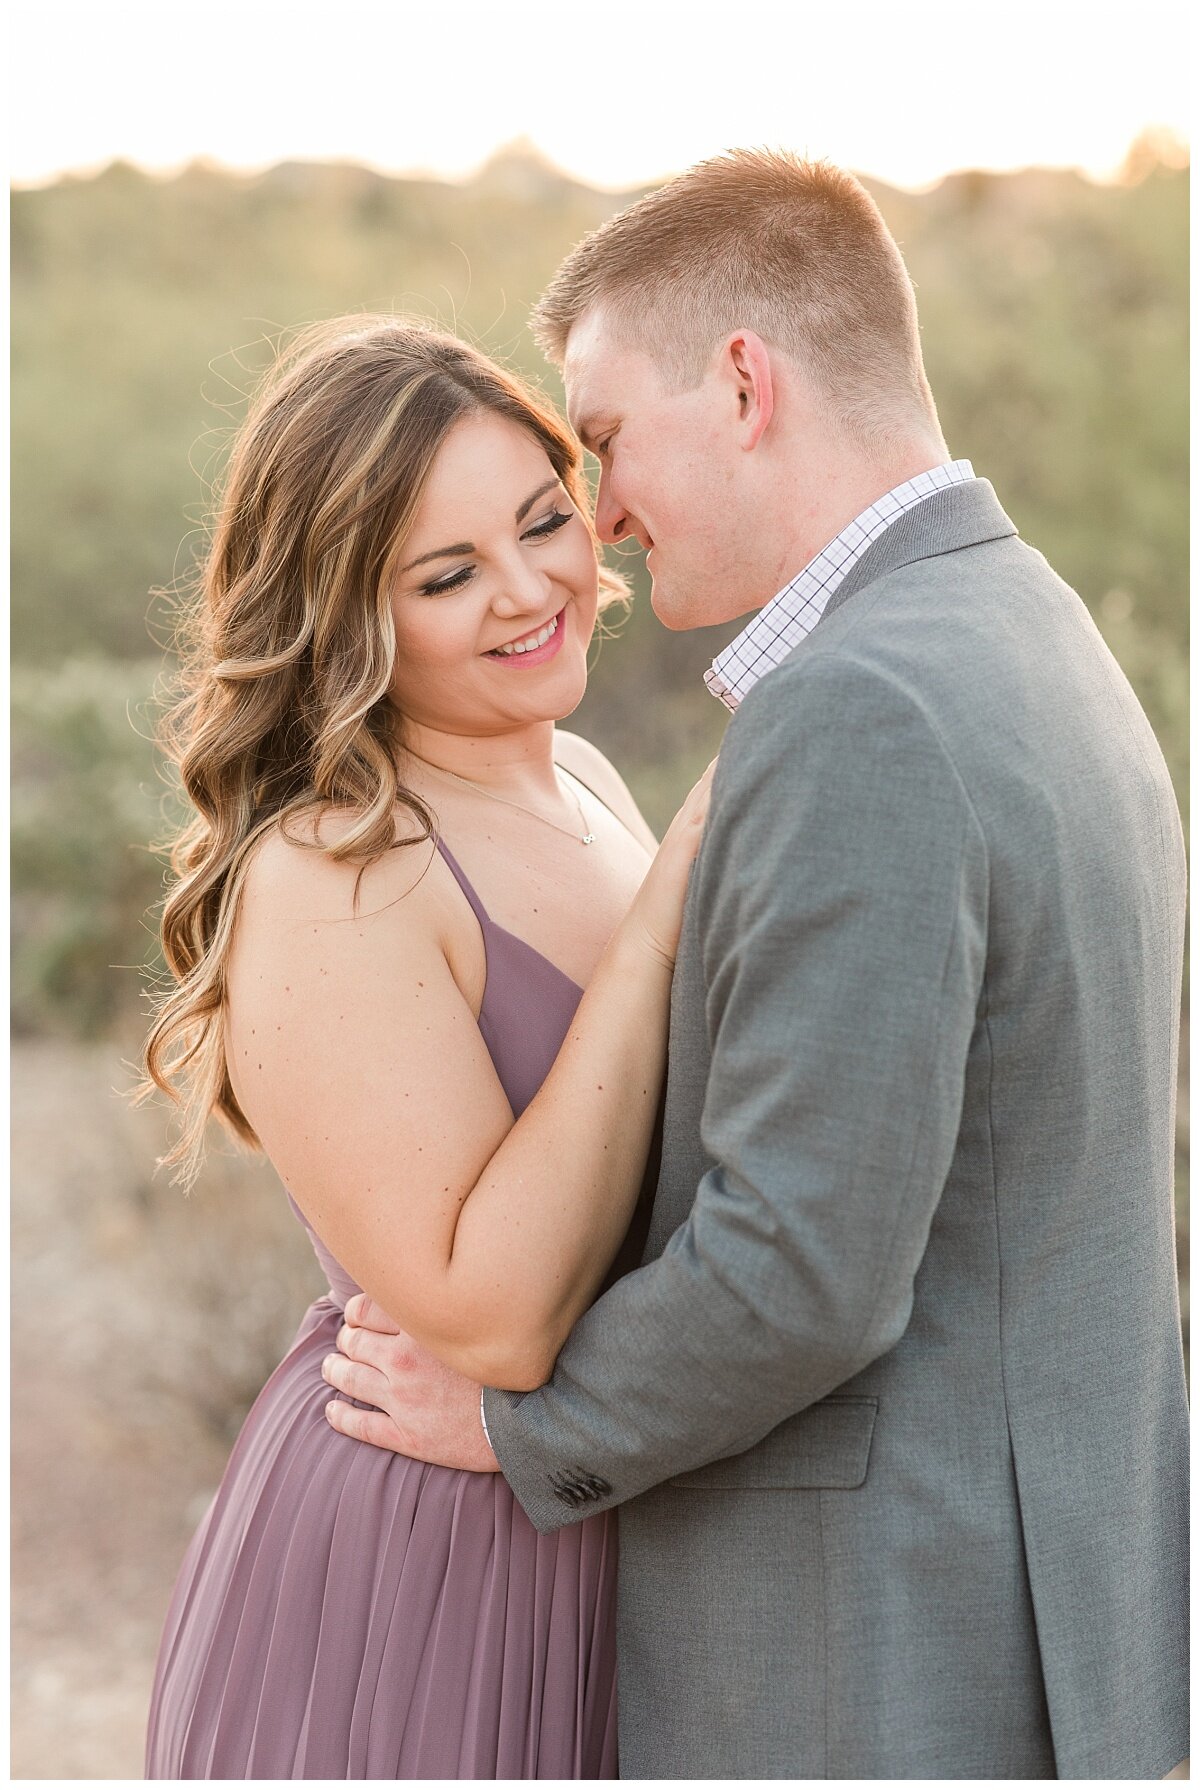 Joyful, Romantic, and true to color wedding photography by Melissa Fritzsche Photography.